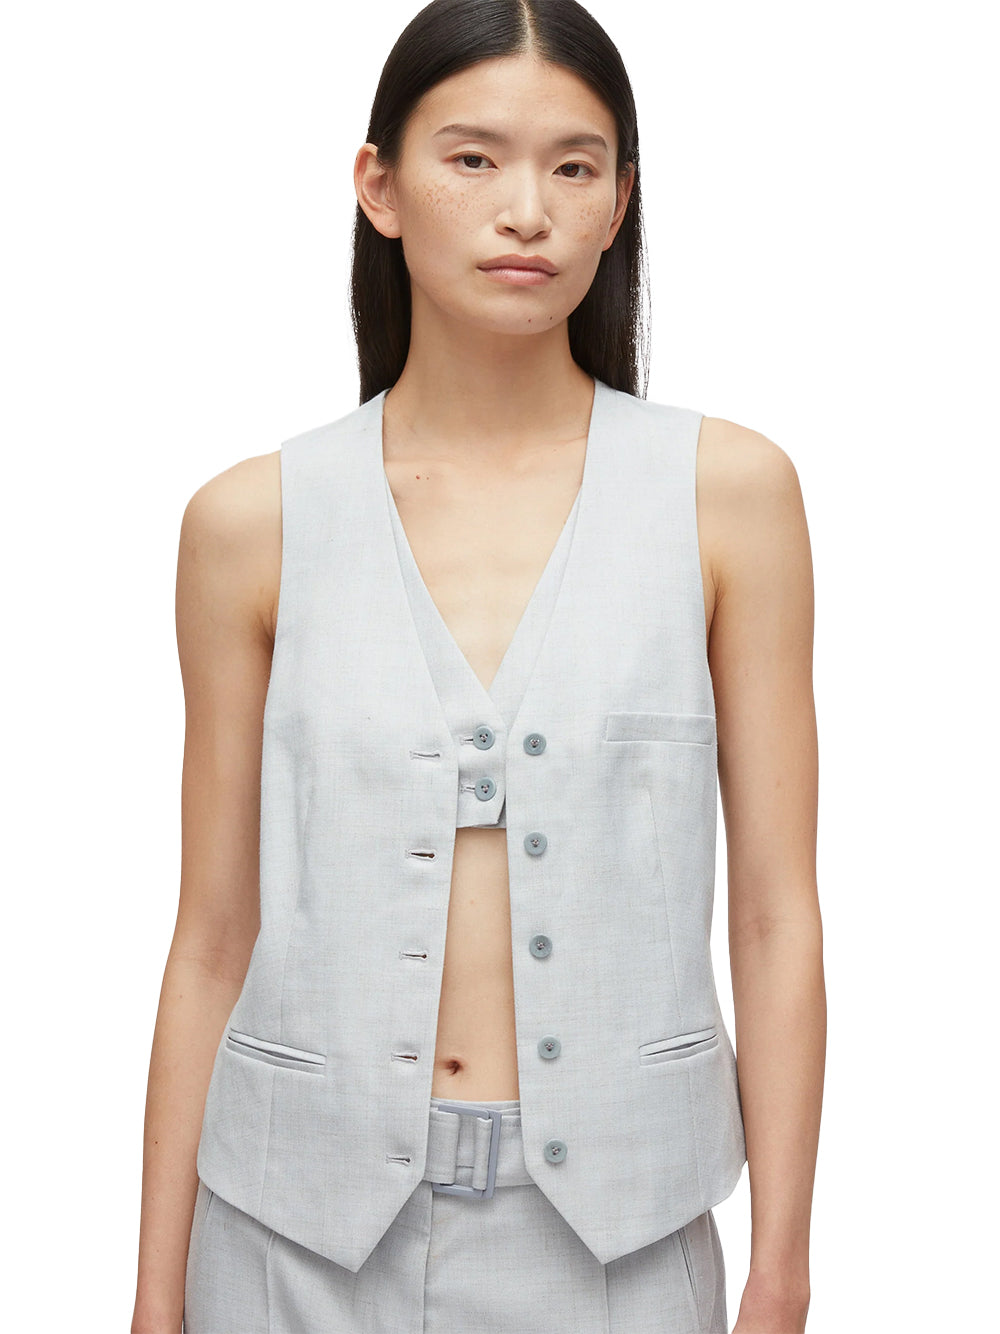 Tailored Vest with Set in Bra (Pale Blue)